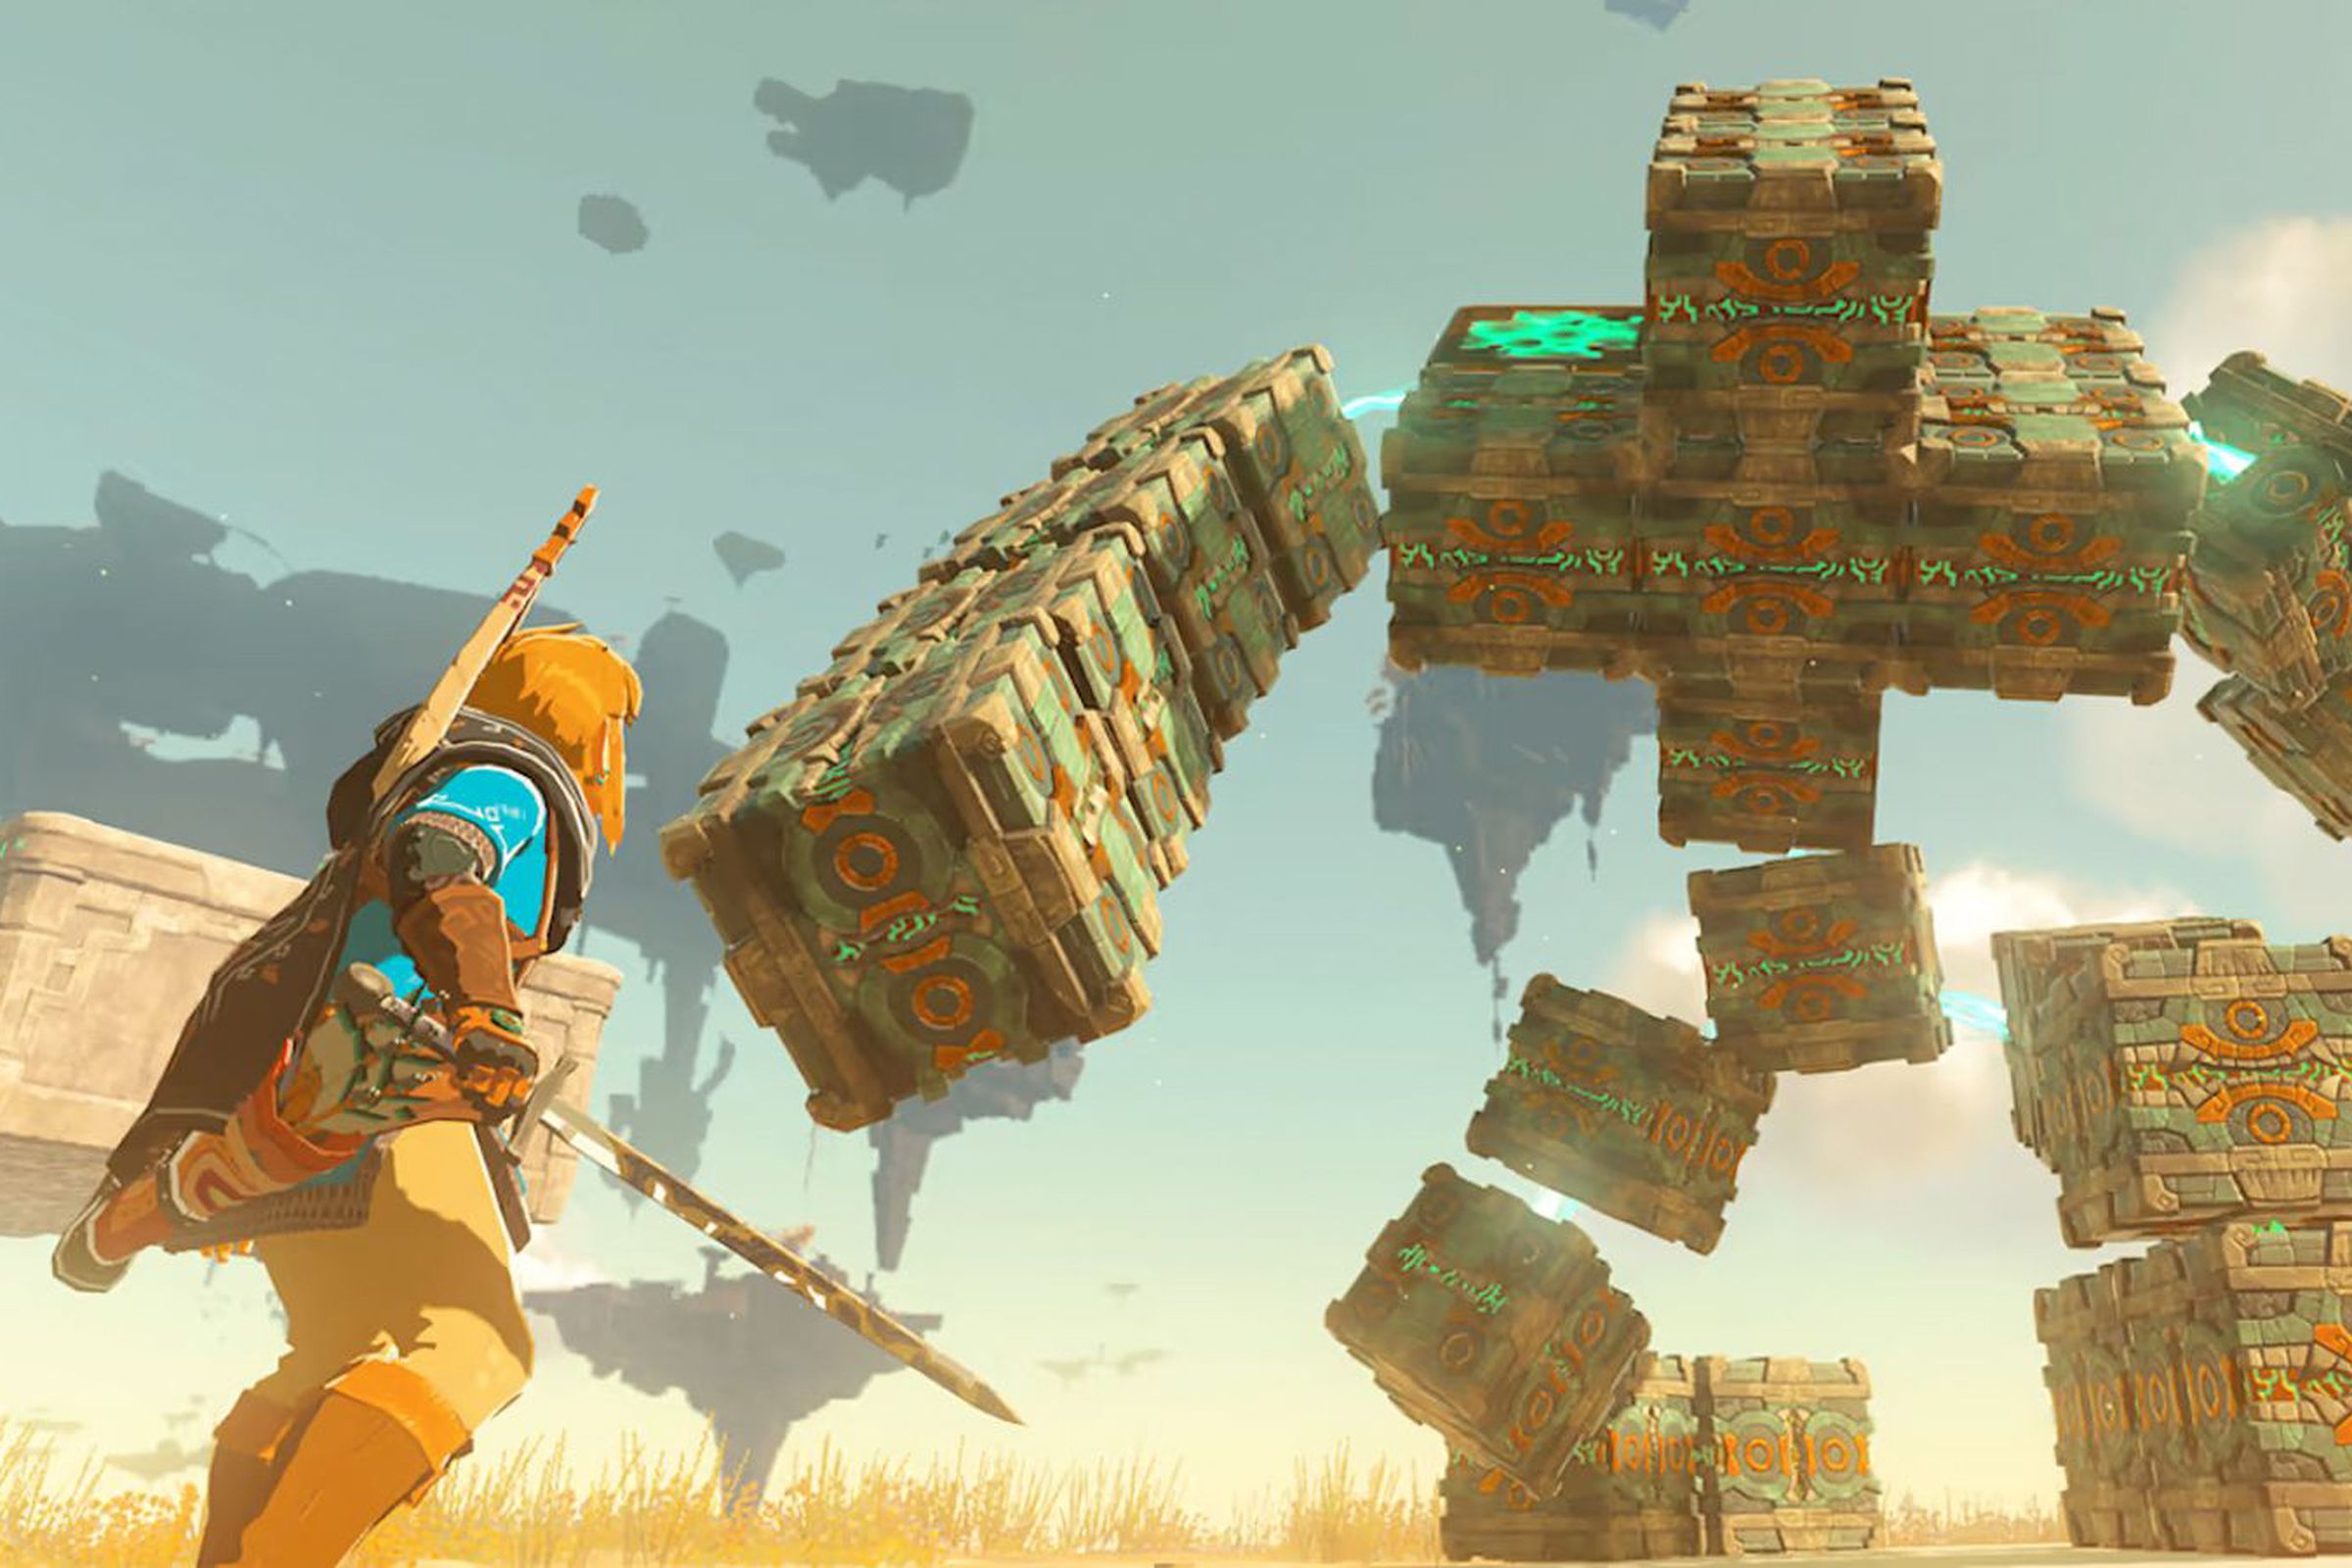 A worthwhile Zelda deal has dropped.